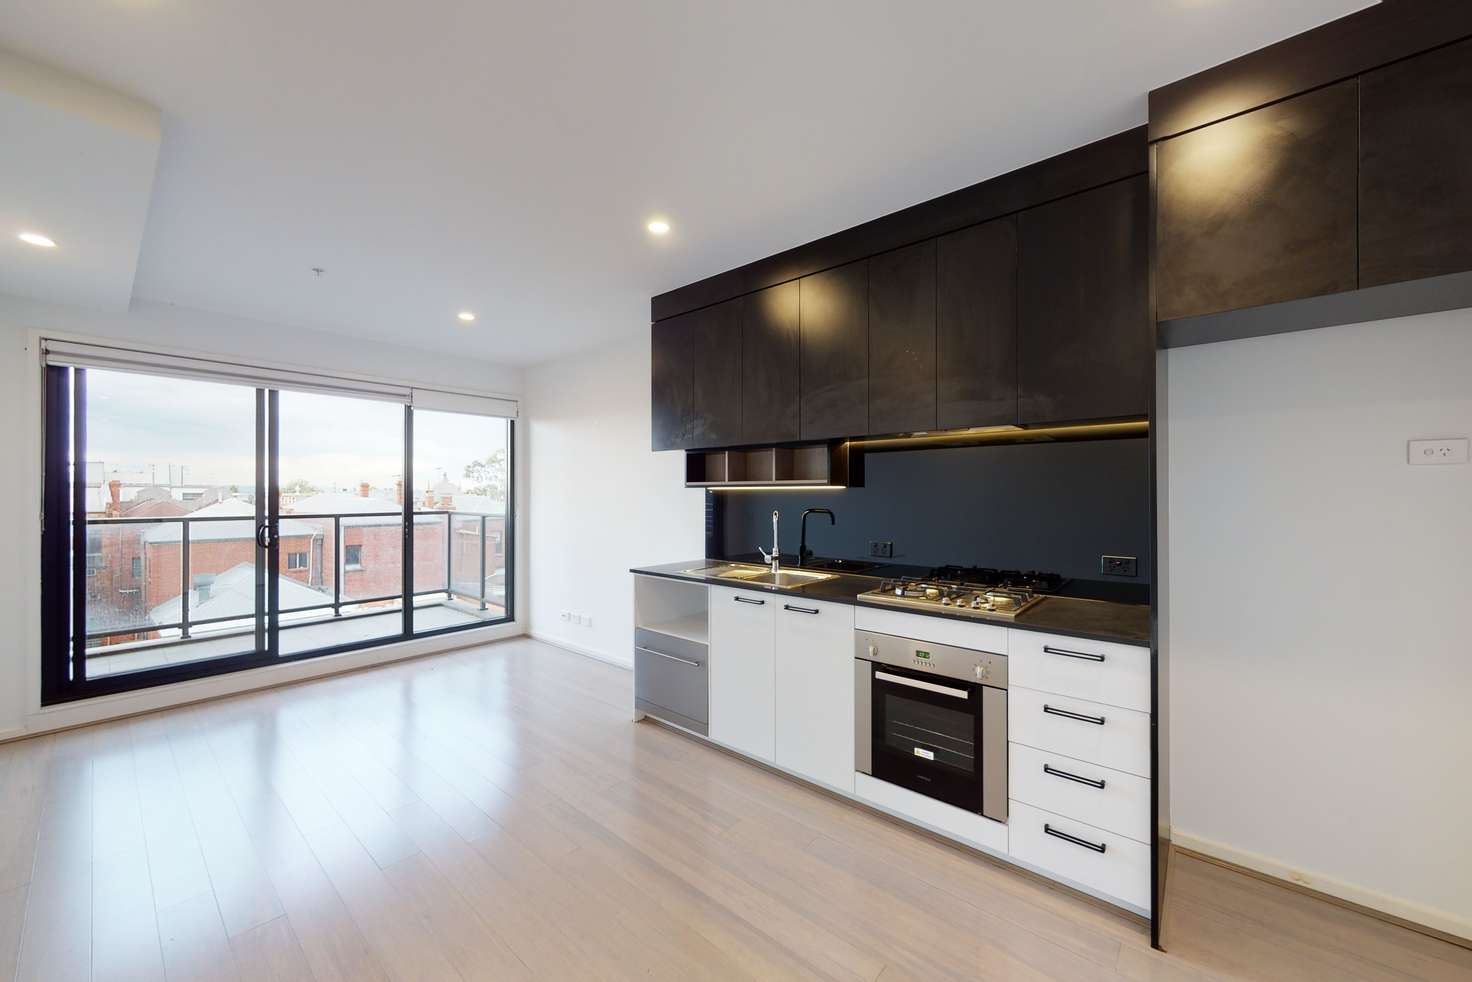 Main view of Homely apartment listing, 409/4 Breese Street, Brunswick VIC 3056